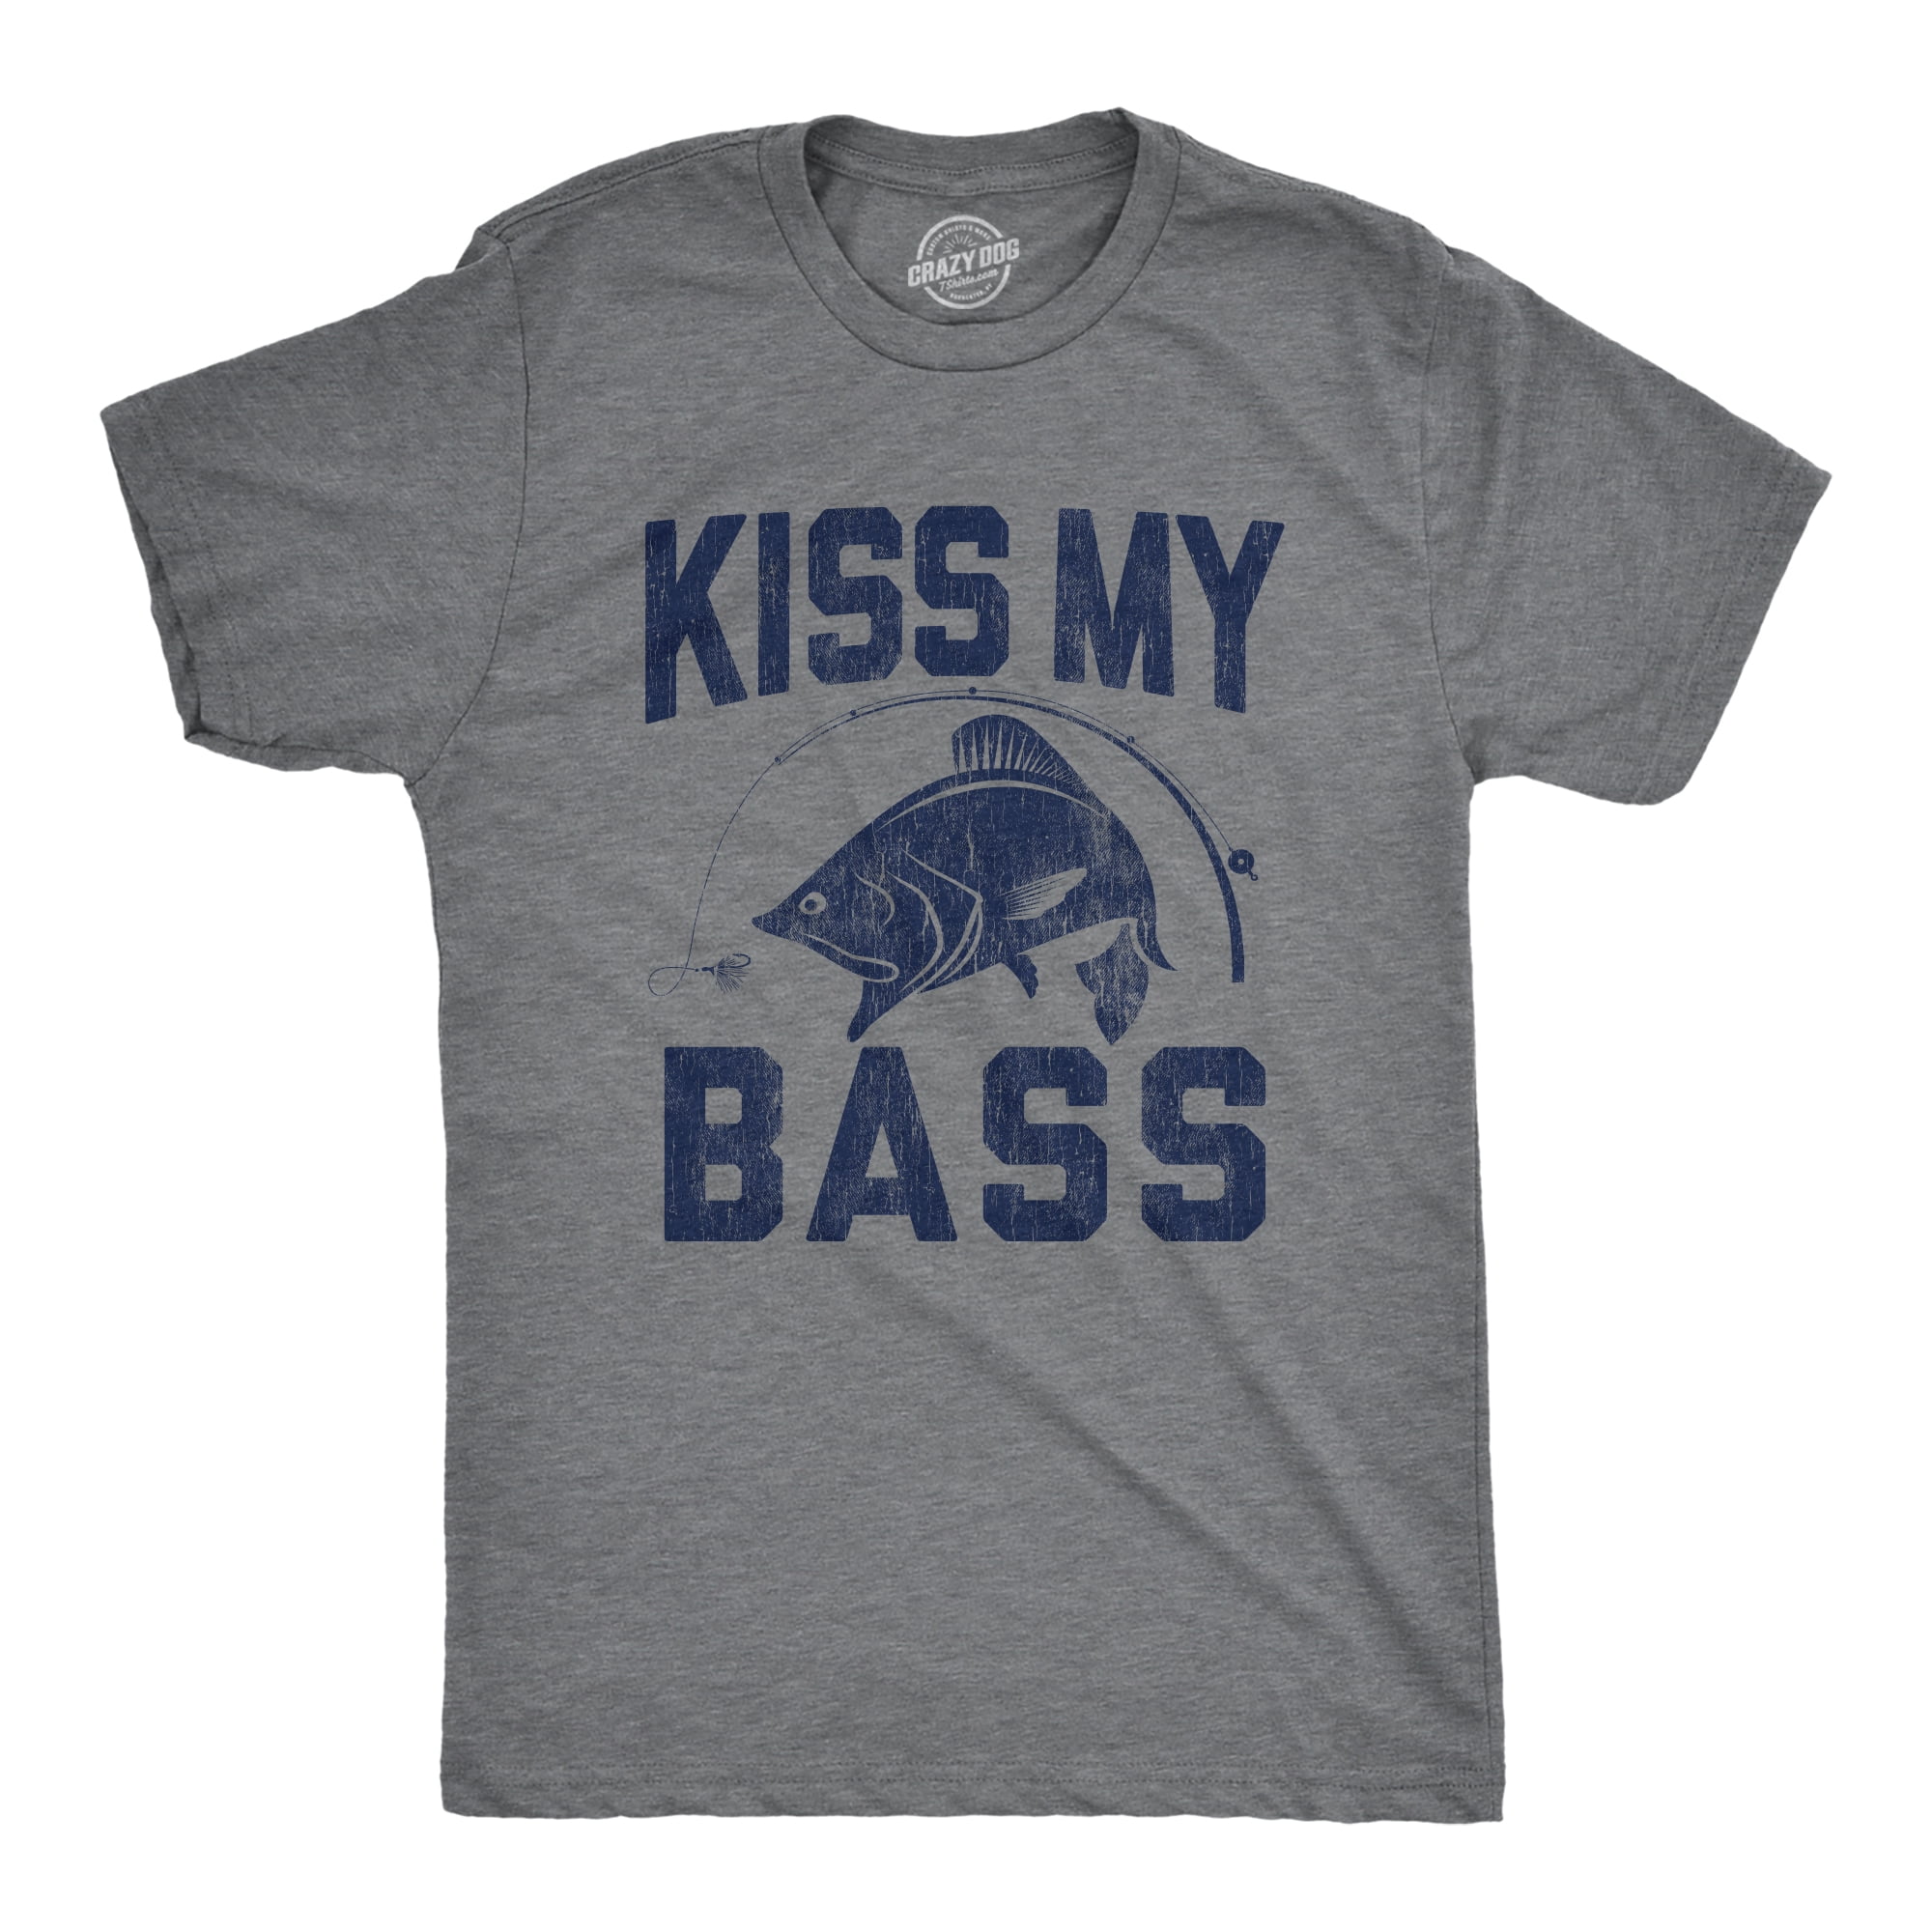 Funny Bass Fishing Shirt Get Your Bass In The Boat Gag Gift 